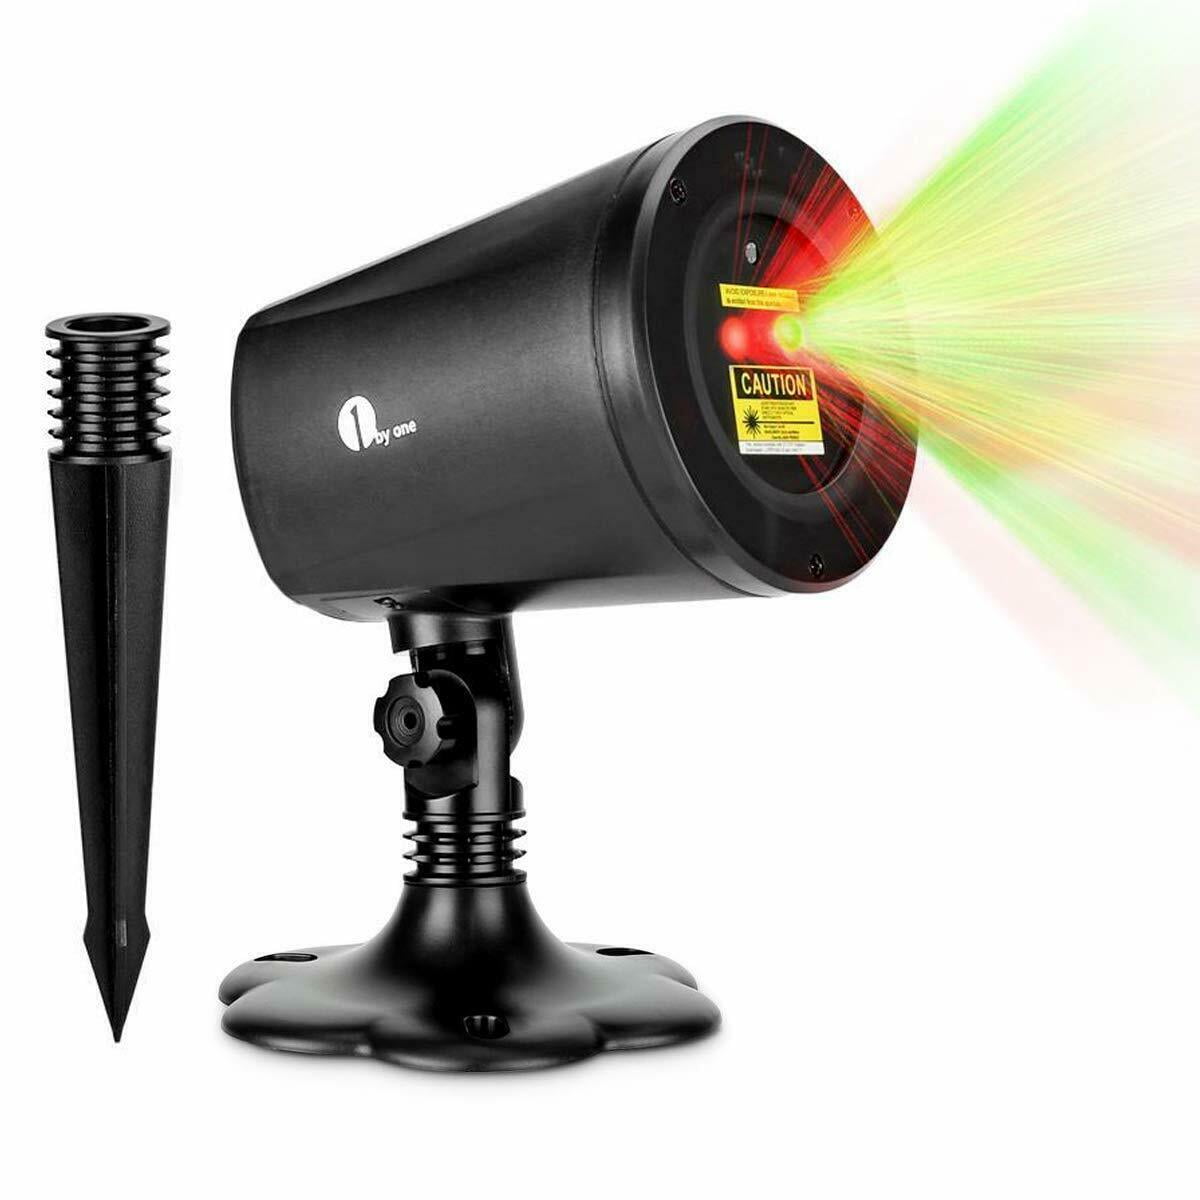 show original title Details about   Mini Laser Projector from inside Model Christmas Decorations Green Red 